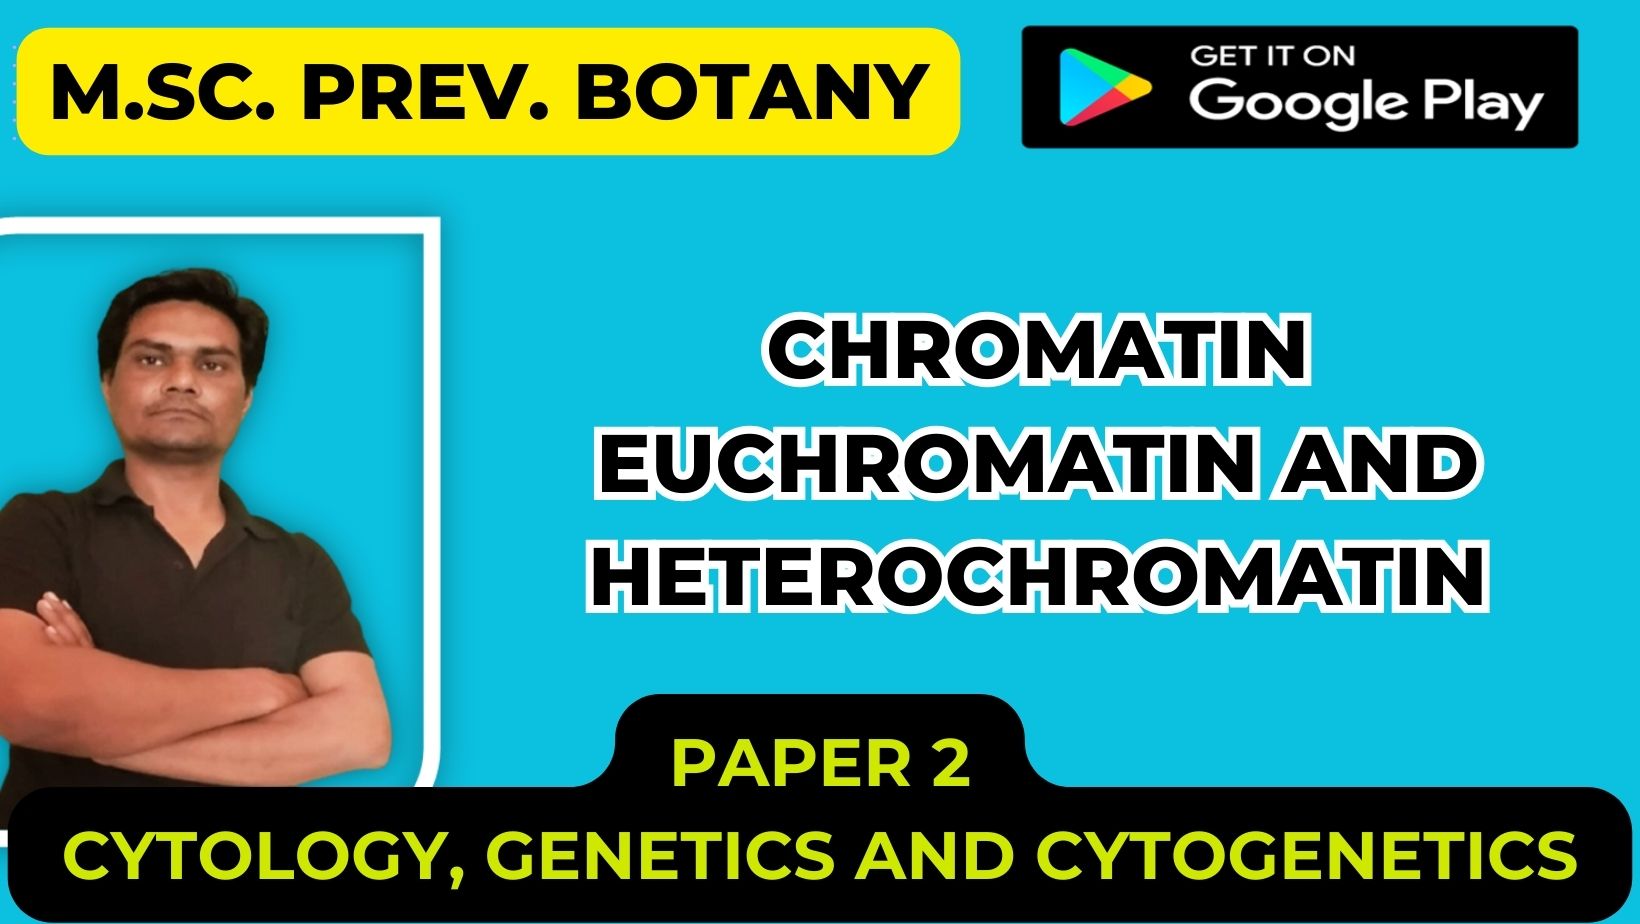 You are currently viewing CHROMATIN EUCHROMATIN AND HETEROCHROMATIN